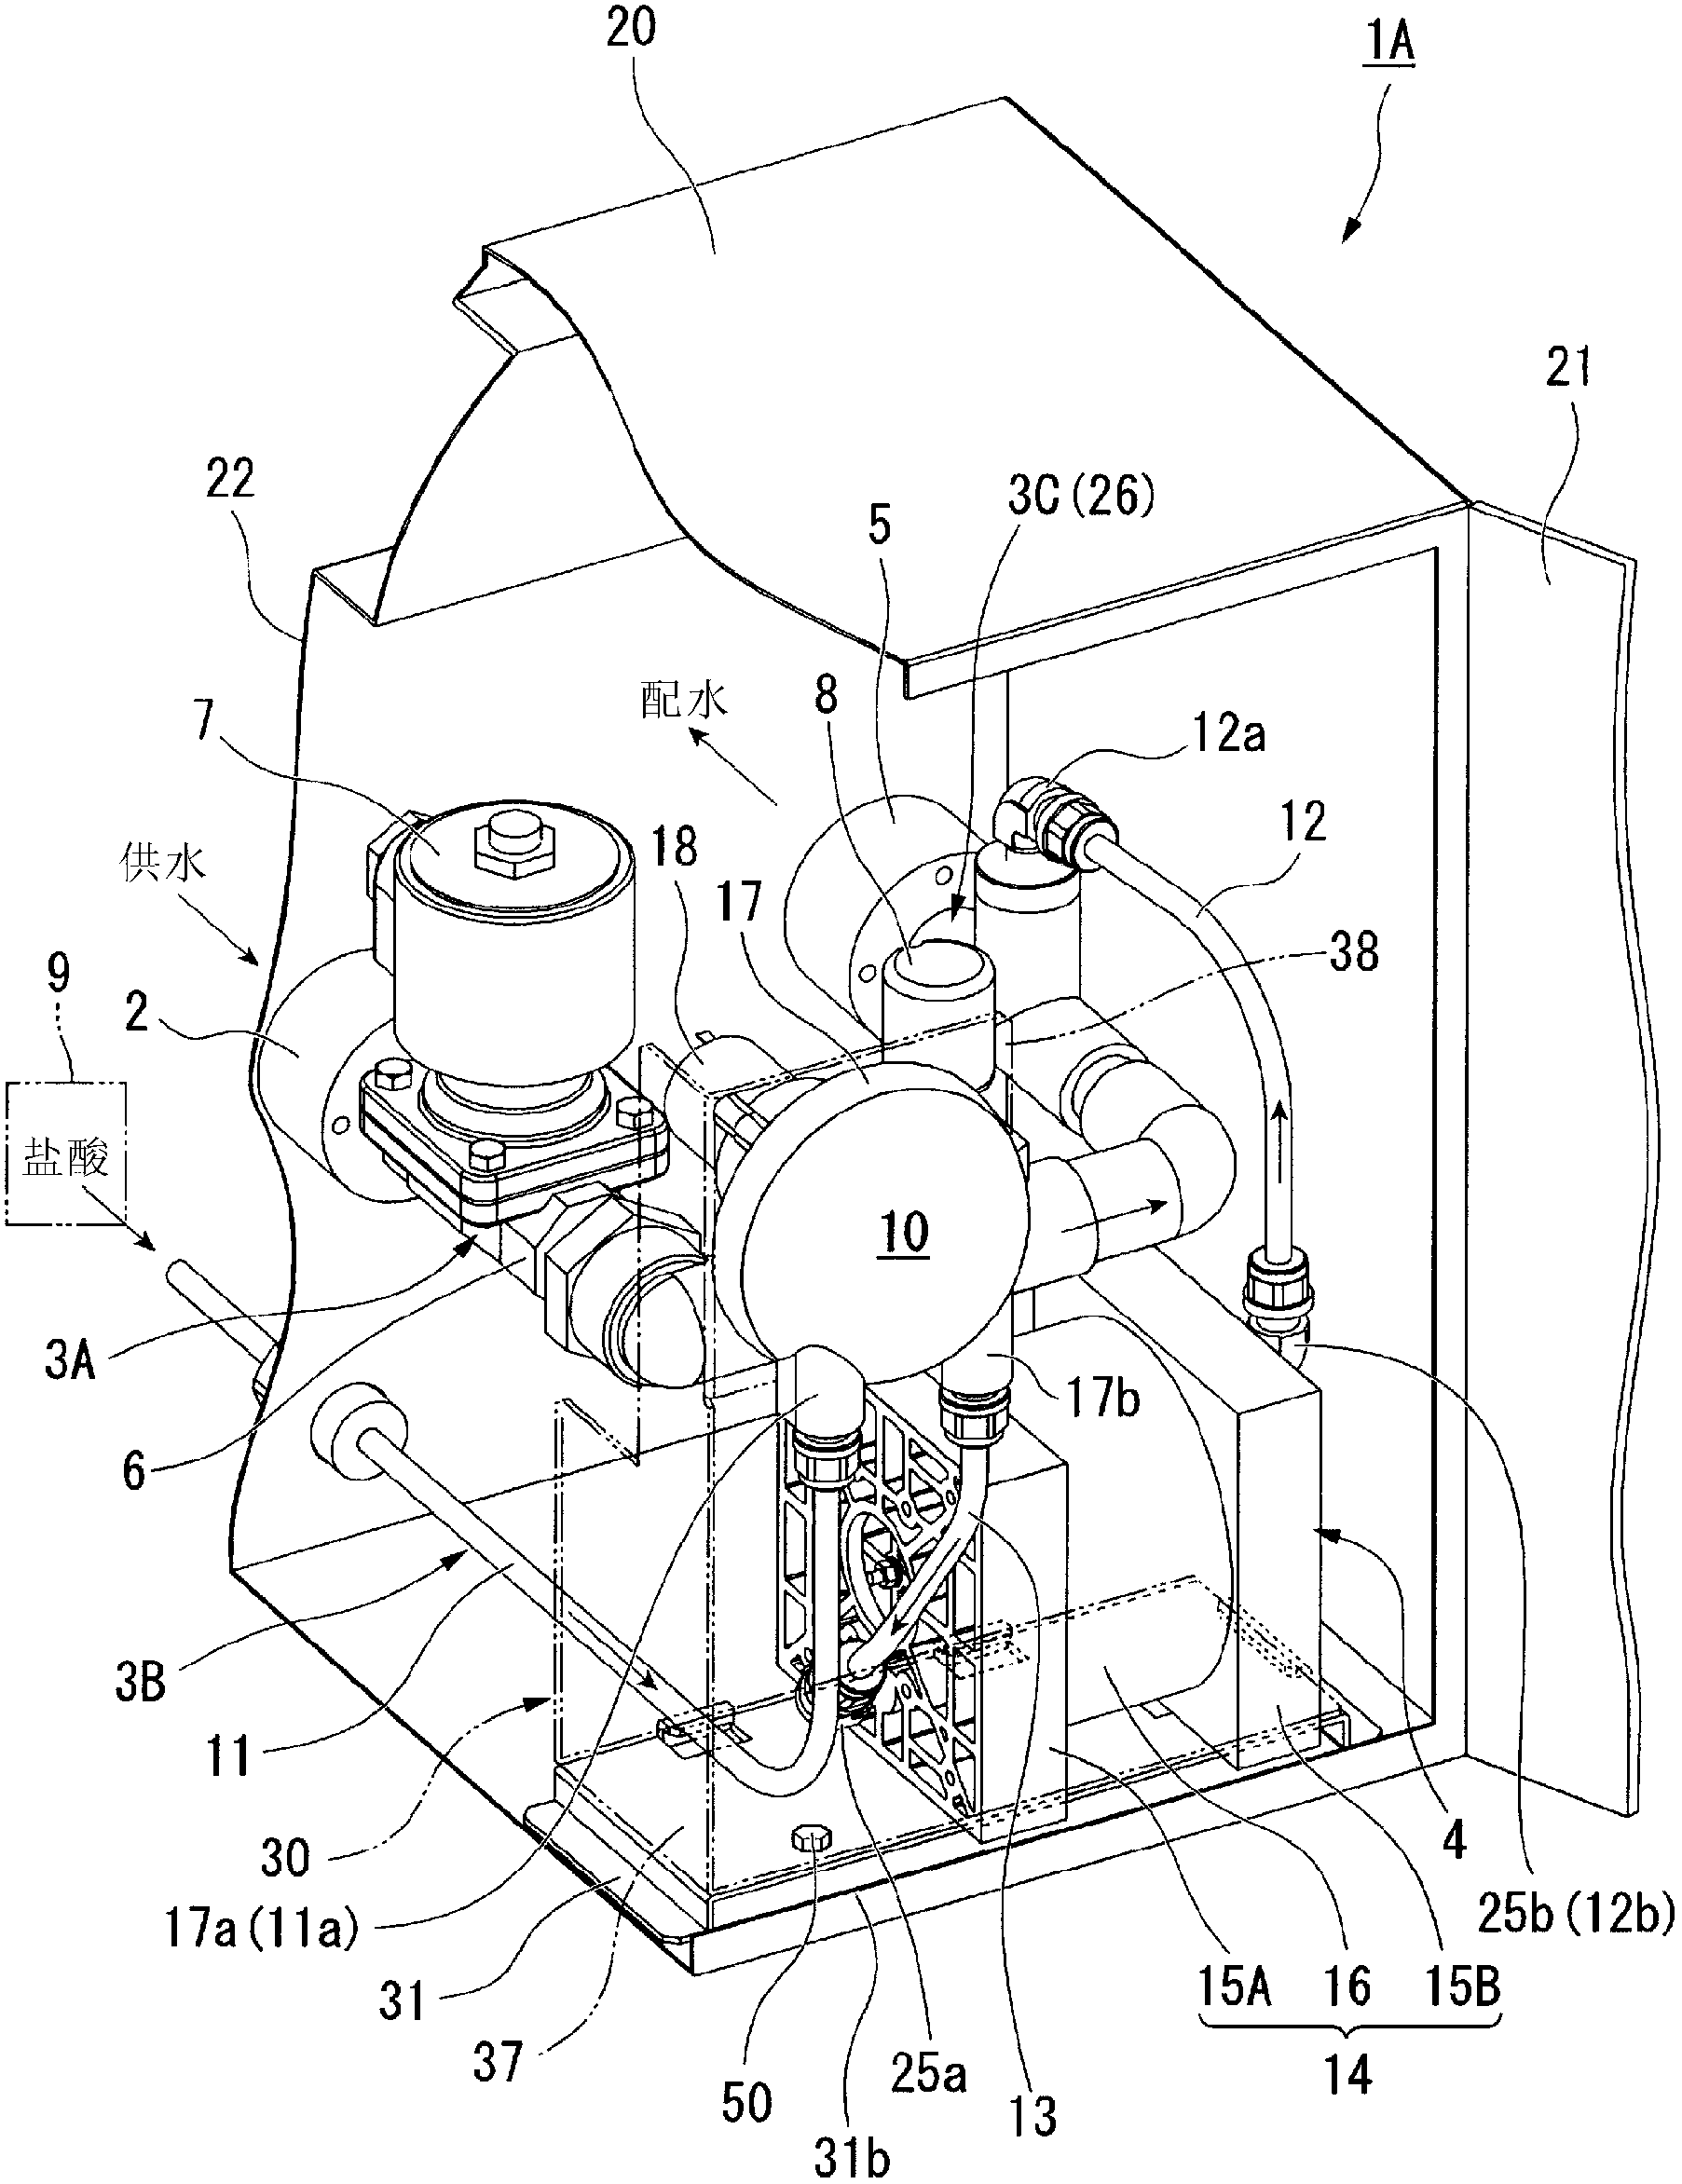 Electrolyzed water production apparatus